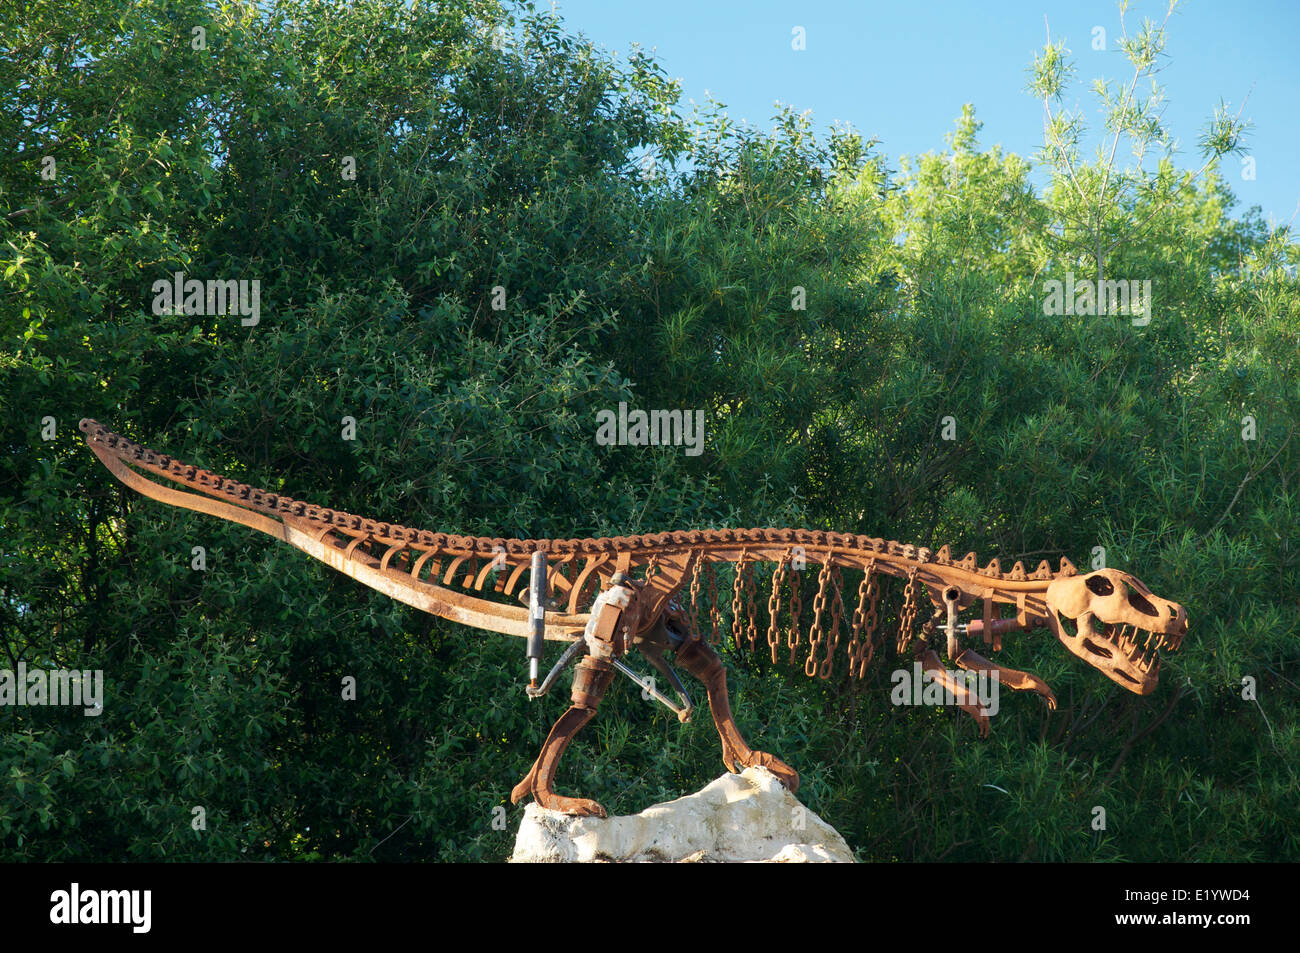 Large Sculpture of a running bipedal dinosaur created out of recycled scrap metal by Mowlam Metalcraft of Dorchester. Dorset, England, United Kingdom. Stock Photo